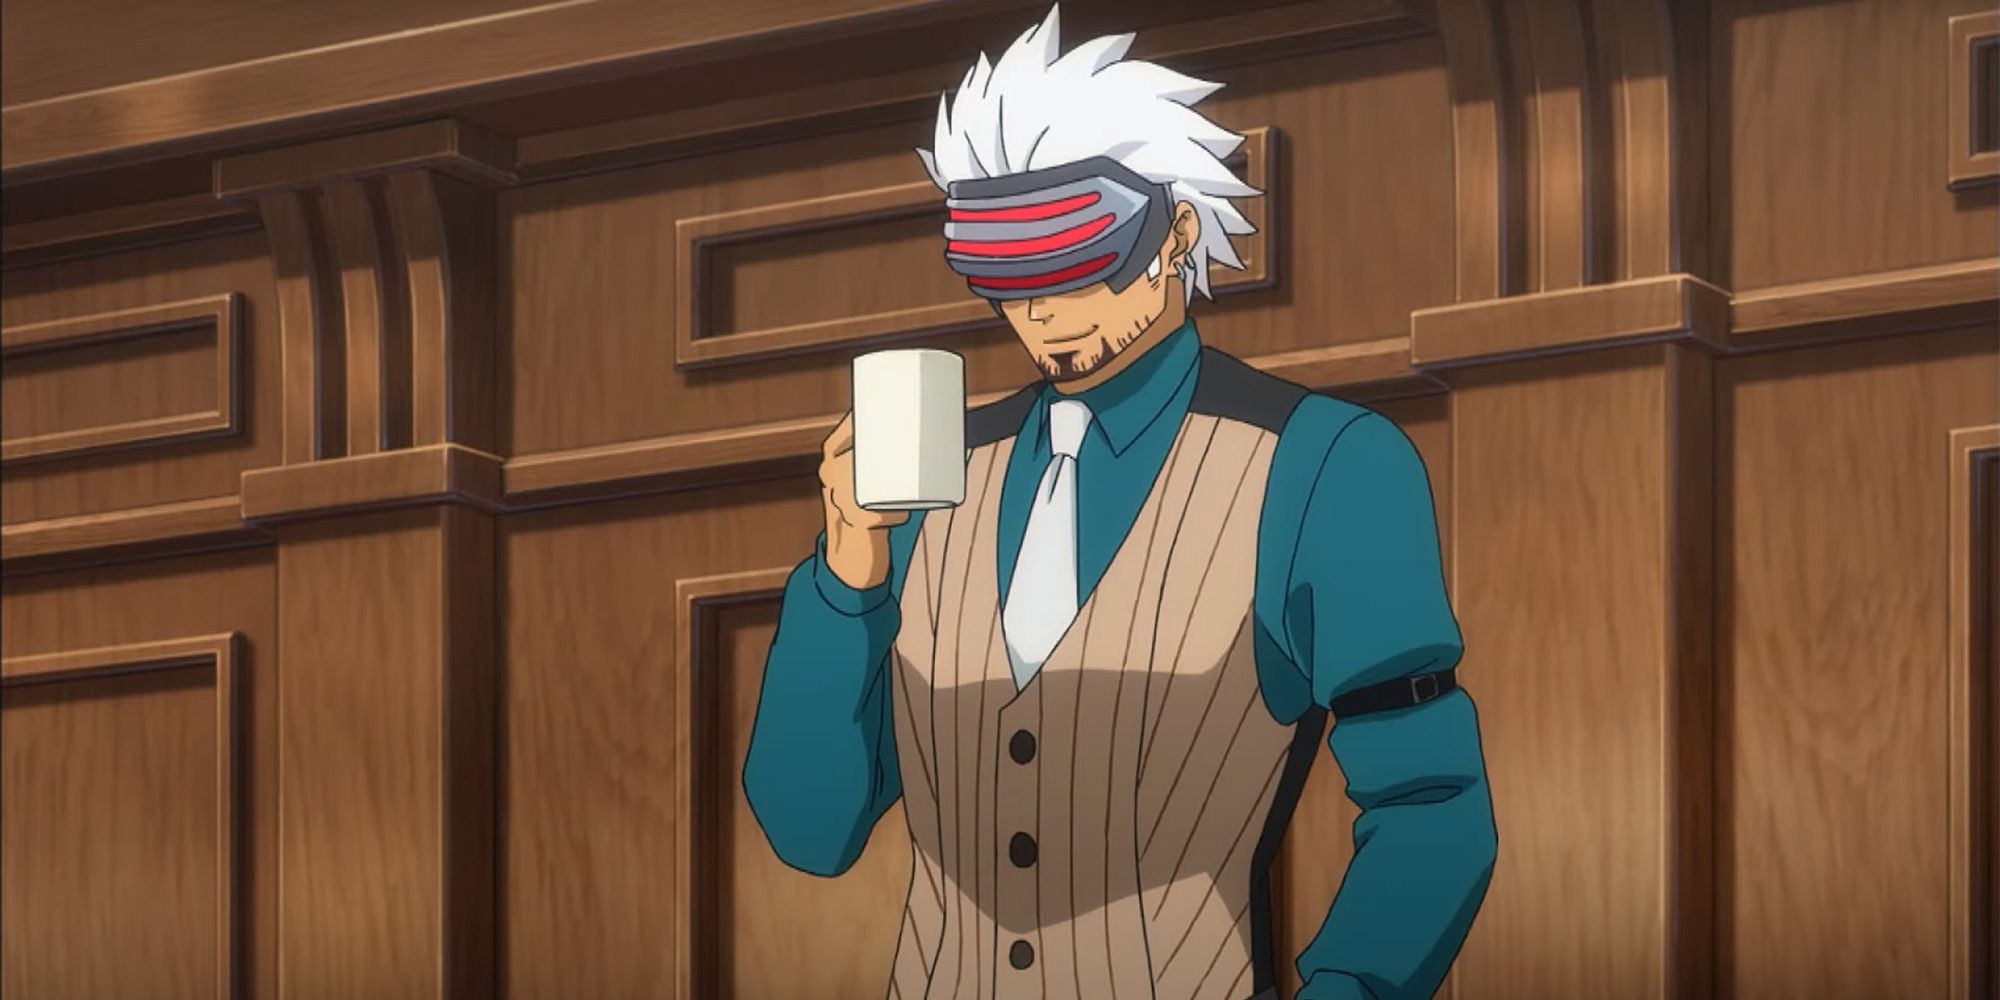 Godot drinking coffee in Ace Attorney